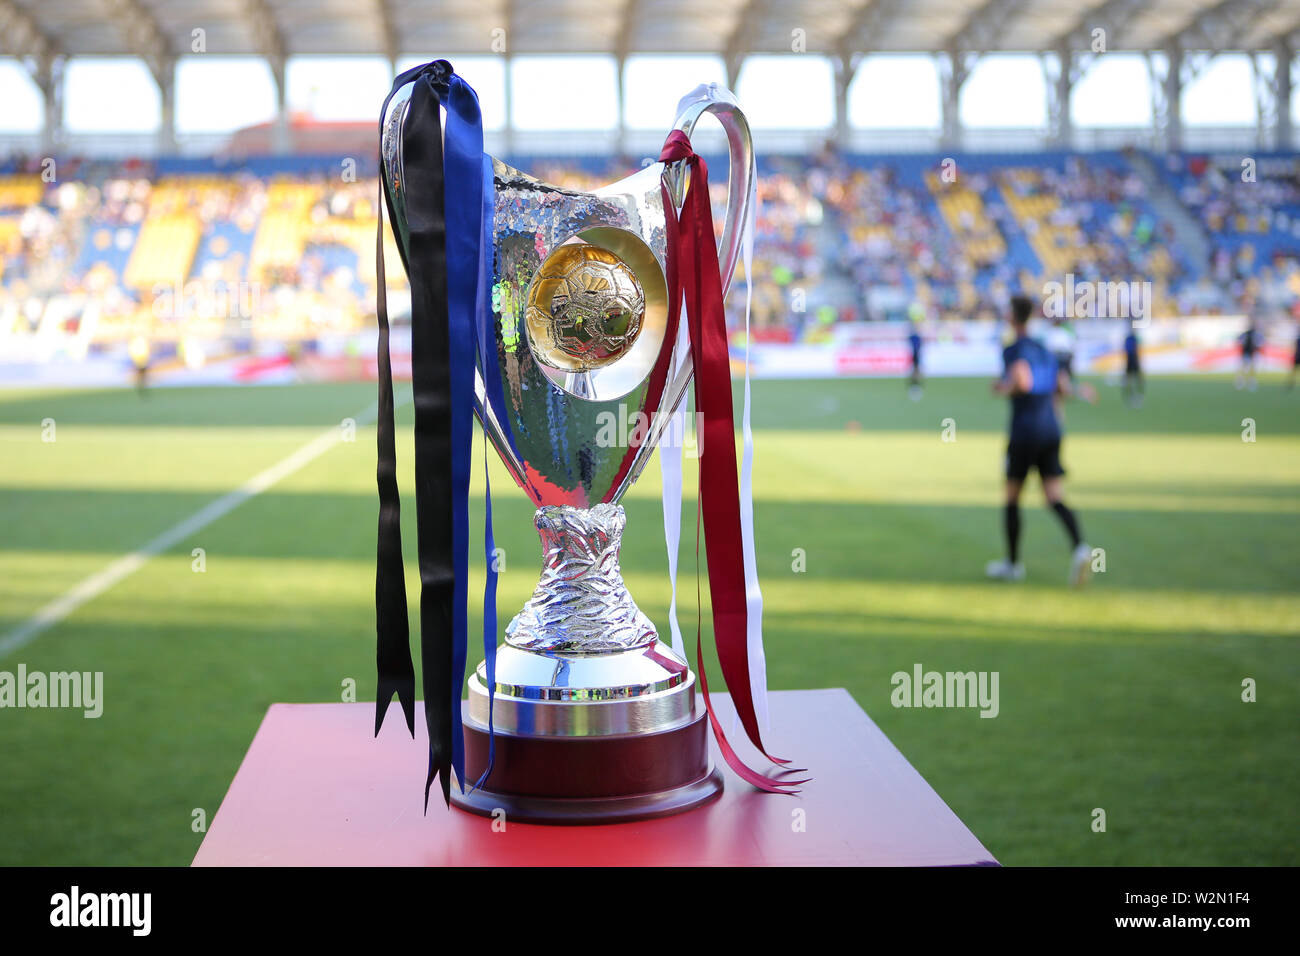 Ploiesti, Romania - July 6, 2019: Details with the Romanian Supercup (Supercupa Romaniei) Trophy, before the final game between CFR Cluj and Viitorul Stock Photo